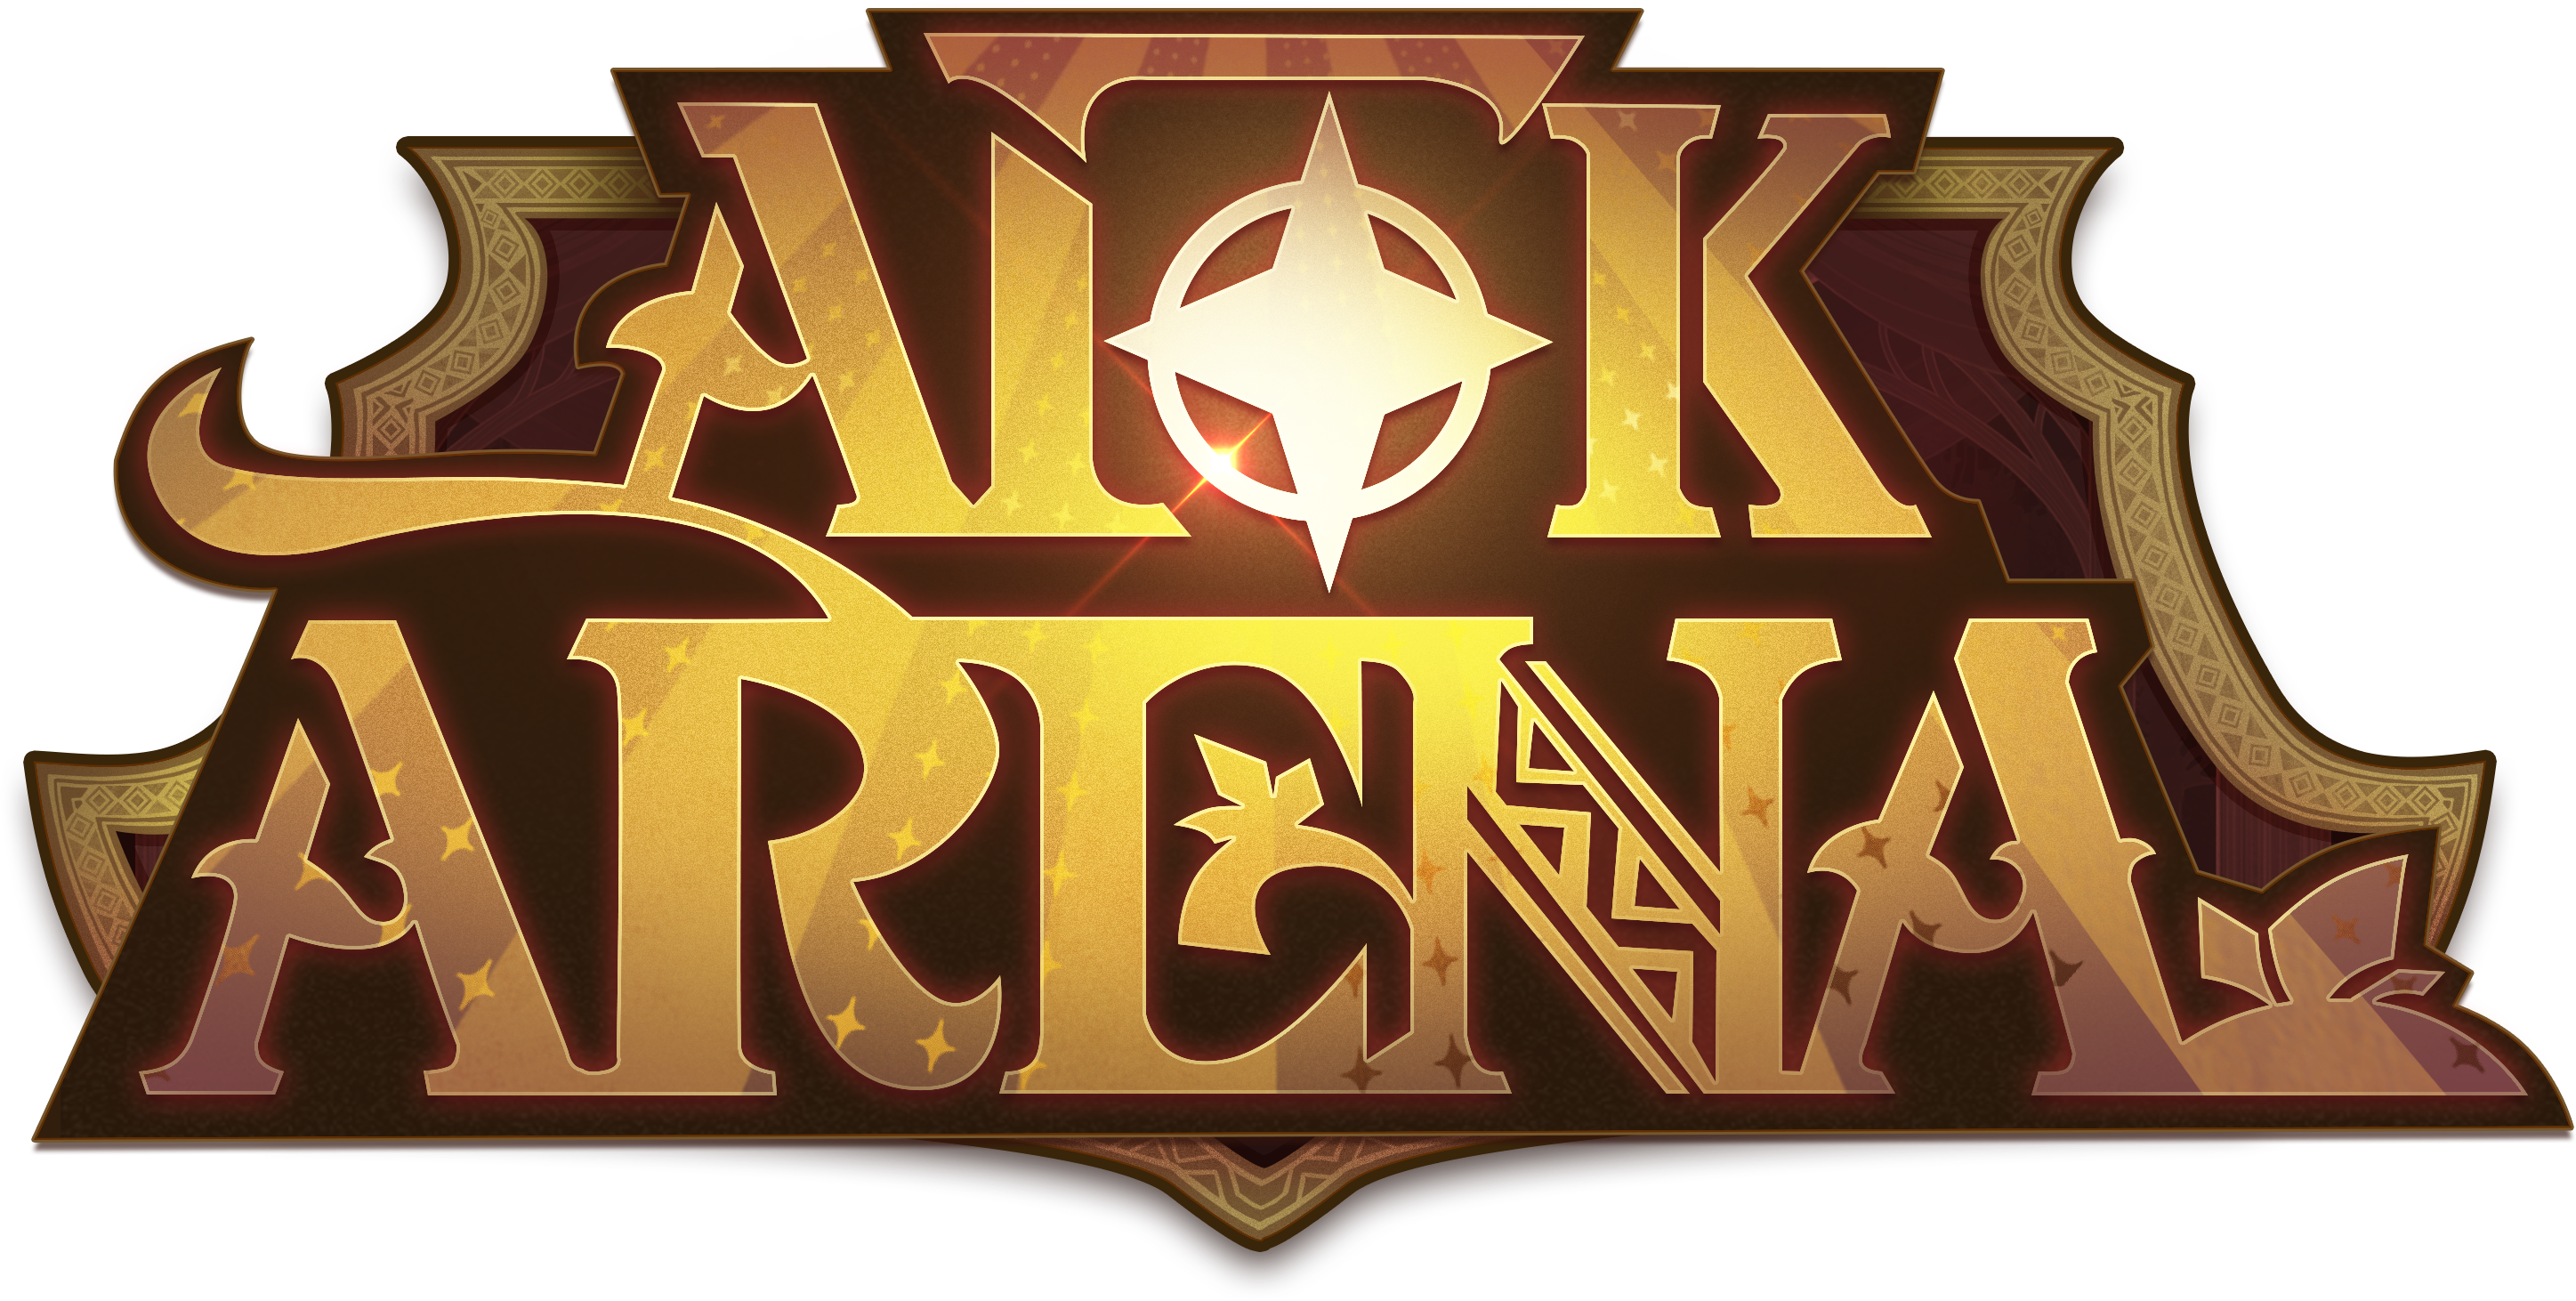 Popular Mobile Idle RPG ‘AFK Arena’ Celebrates Fifth Anniversary with Several Weeks of Glorious Festivities